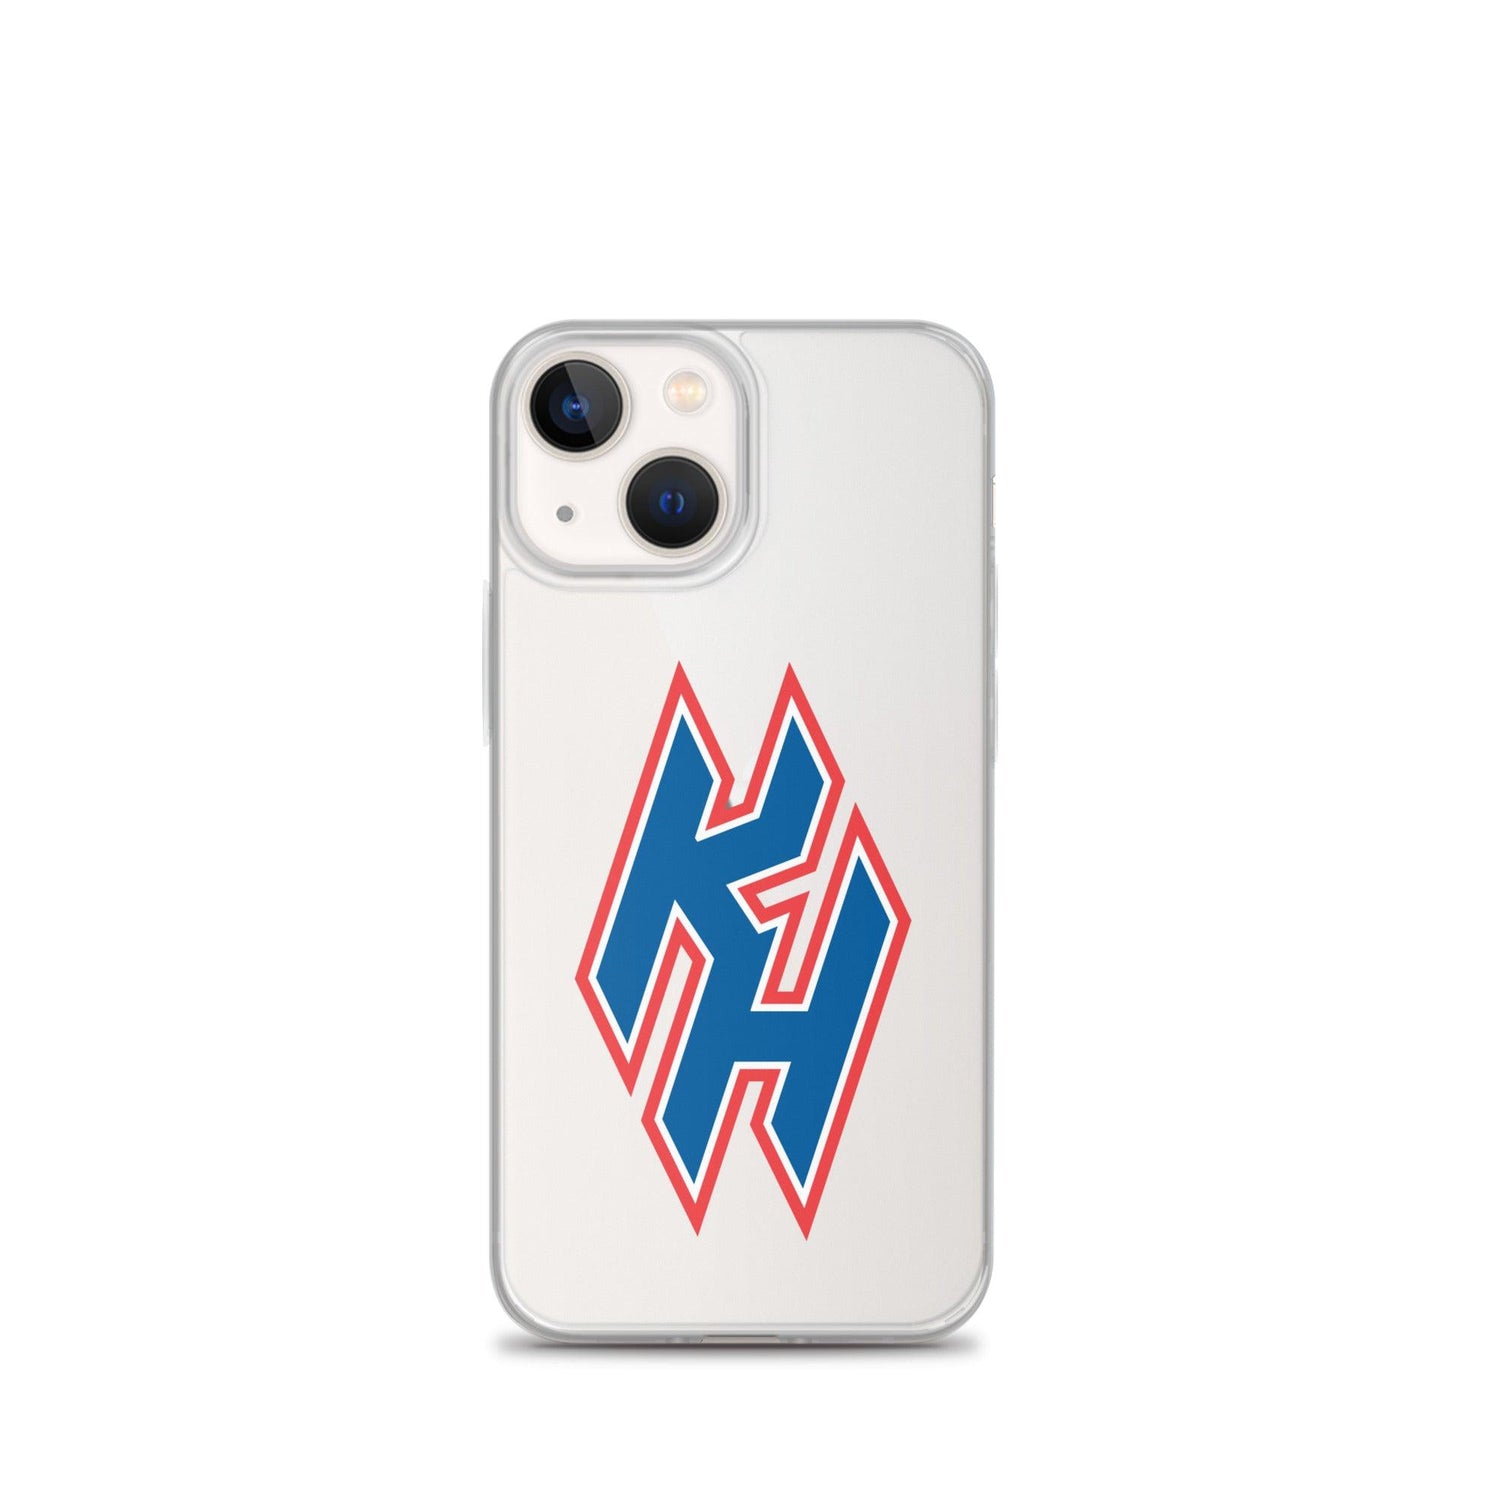 Kody Hoese "Essential" iPhone Case - Fan Arch